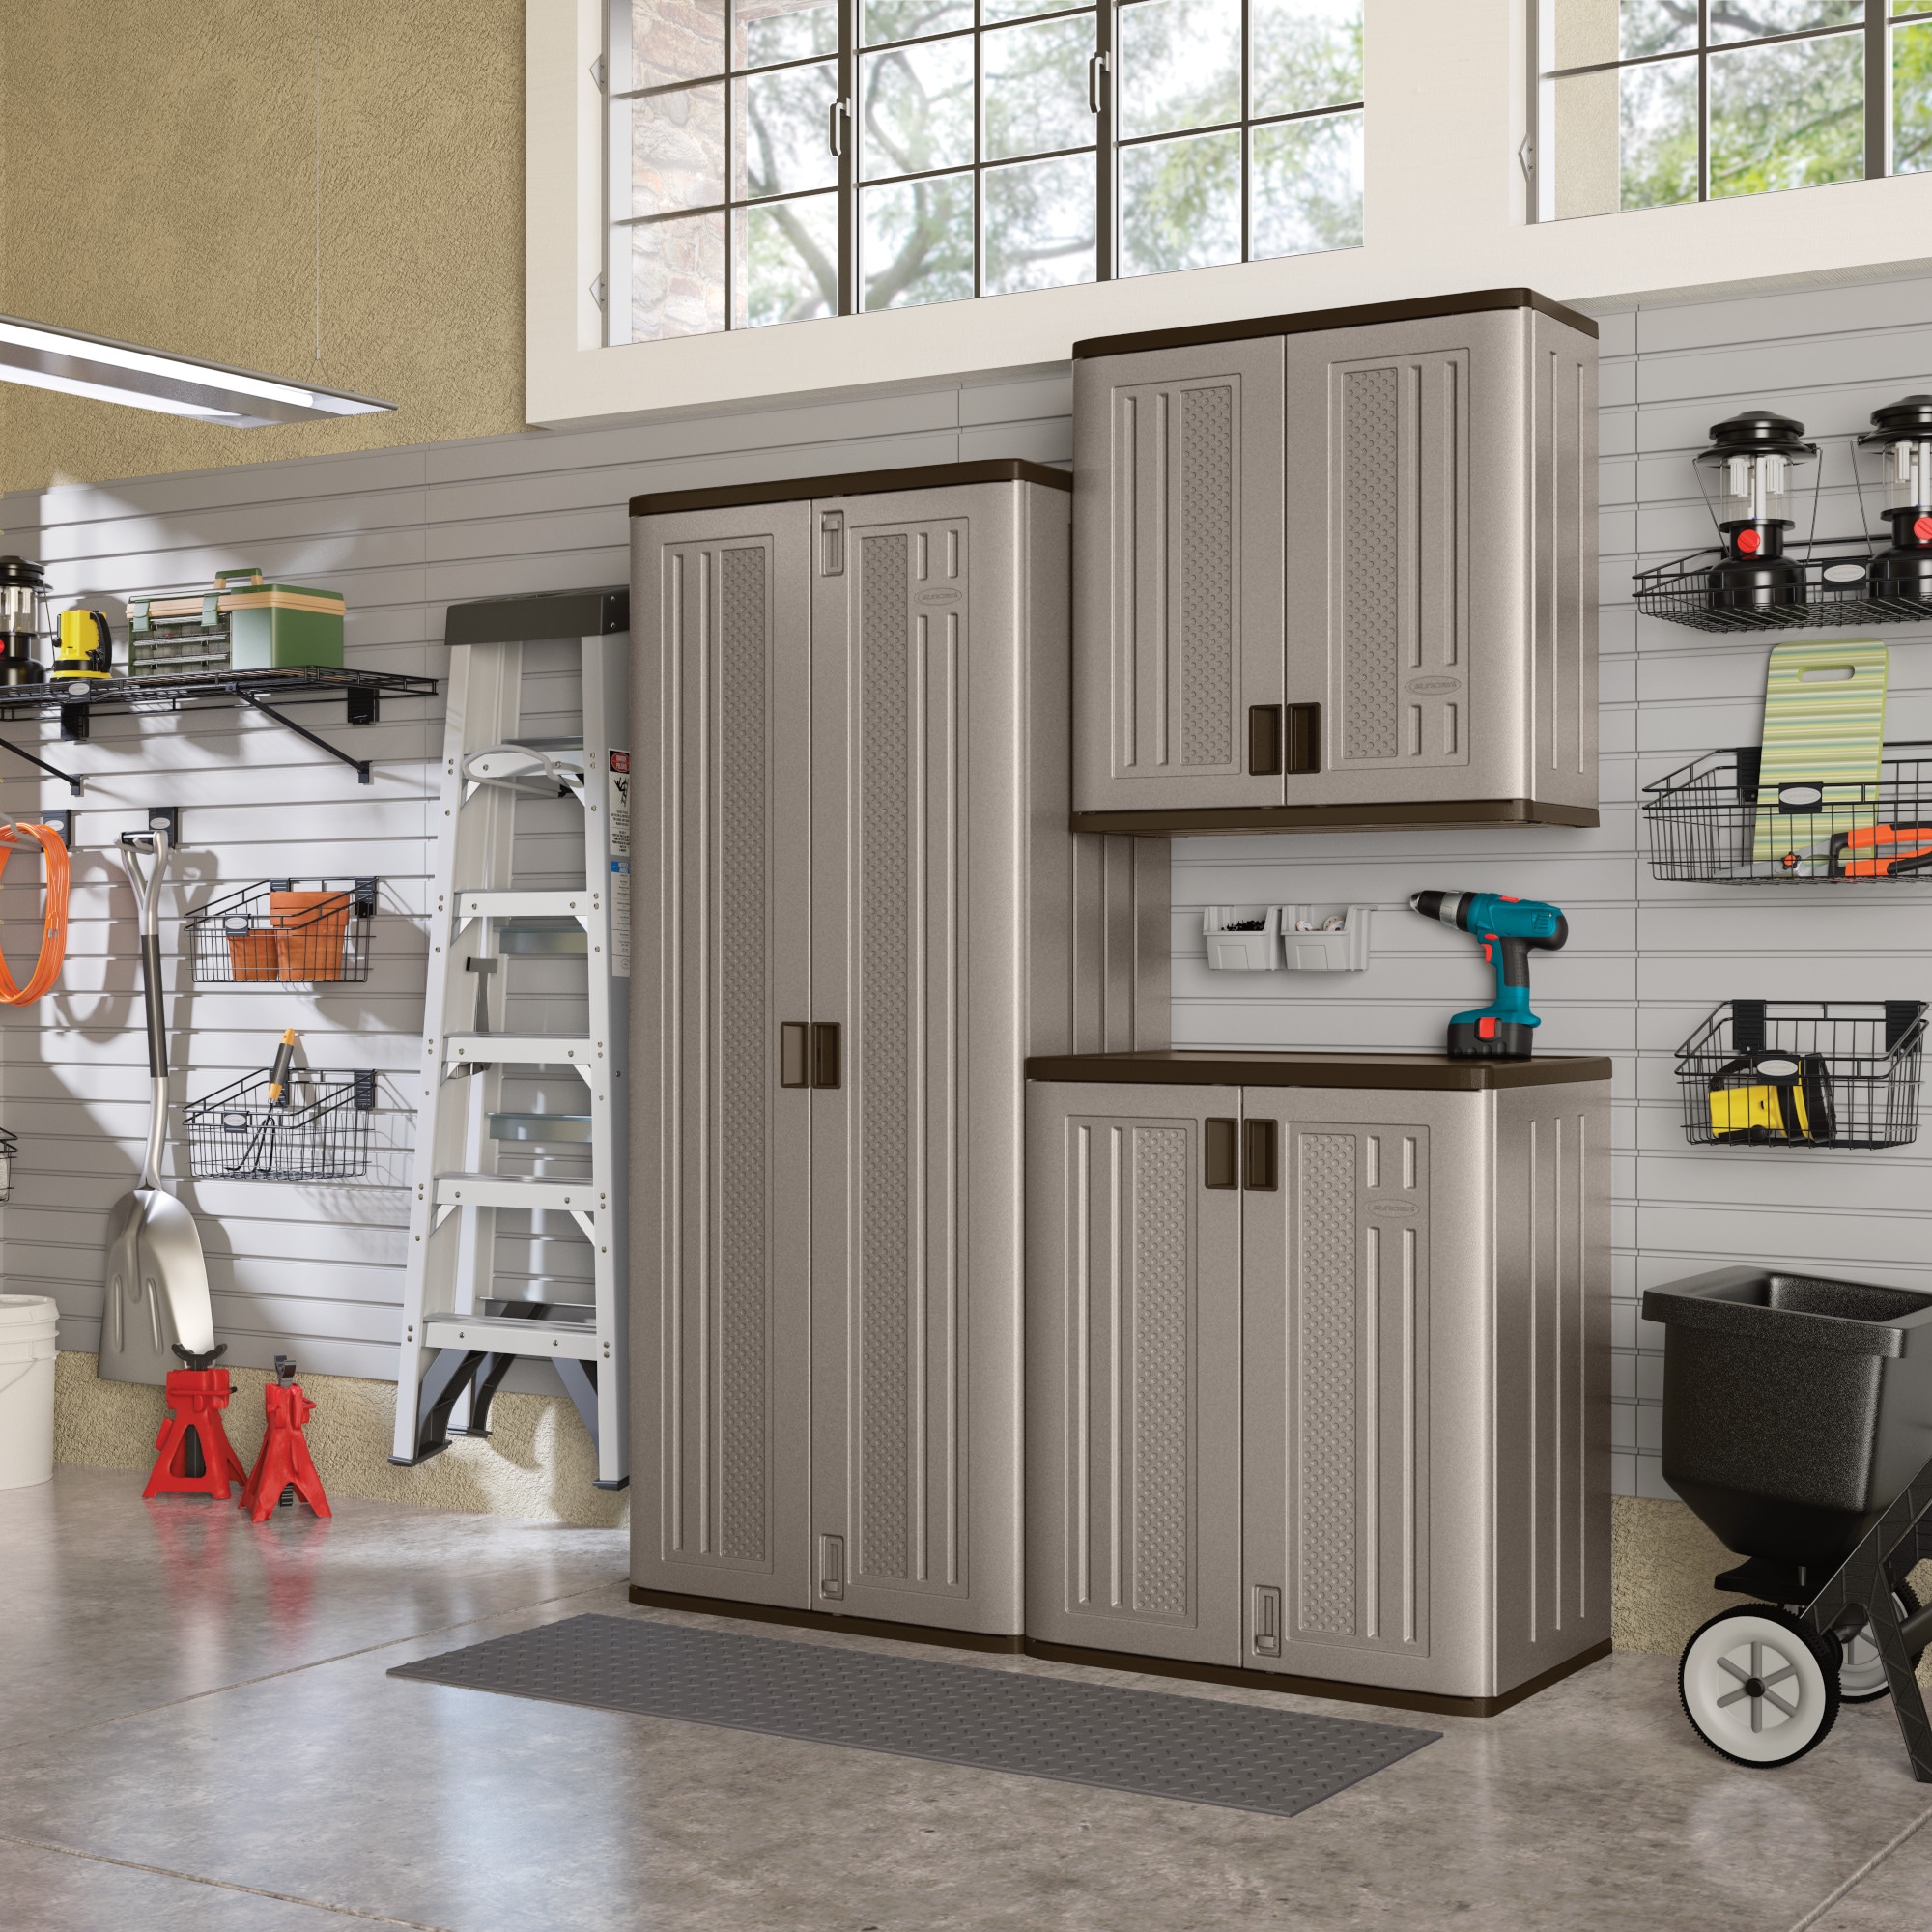 Suncast Plastic Freestanding Garage Cabinet In Gray 30 W X 36 H 20 25 D The Cabinets Department At Lowes Com